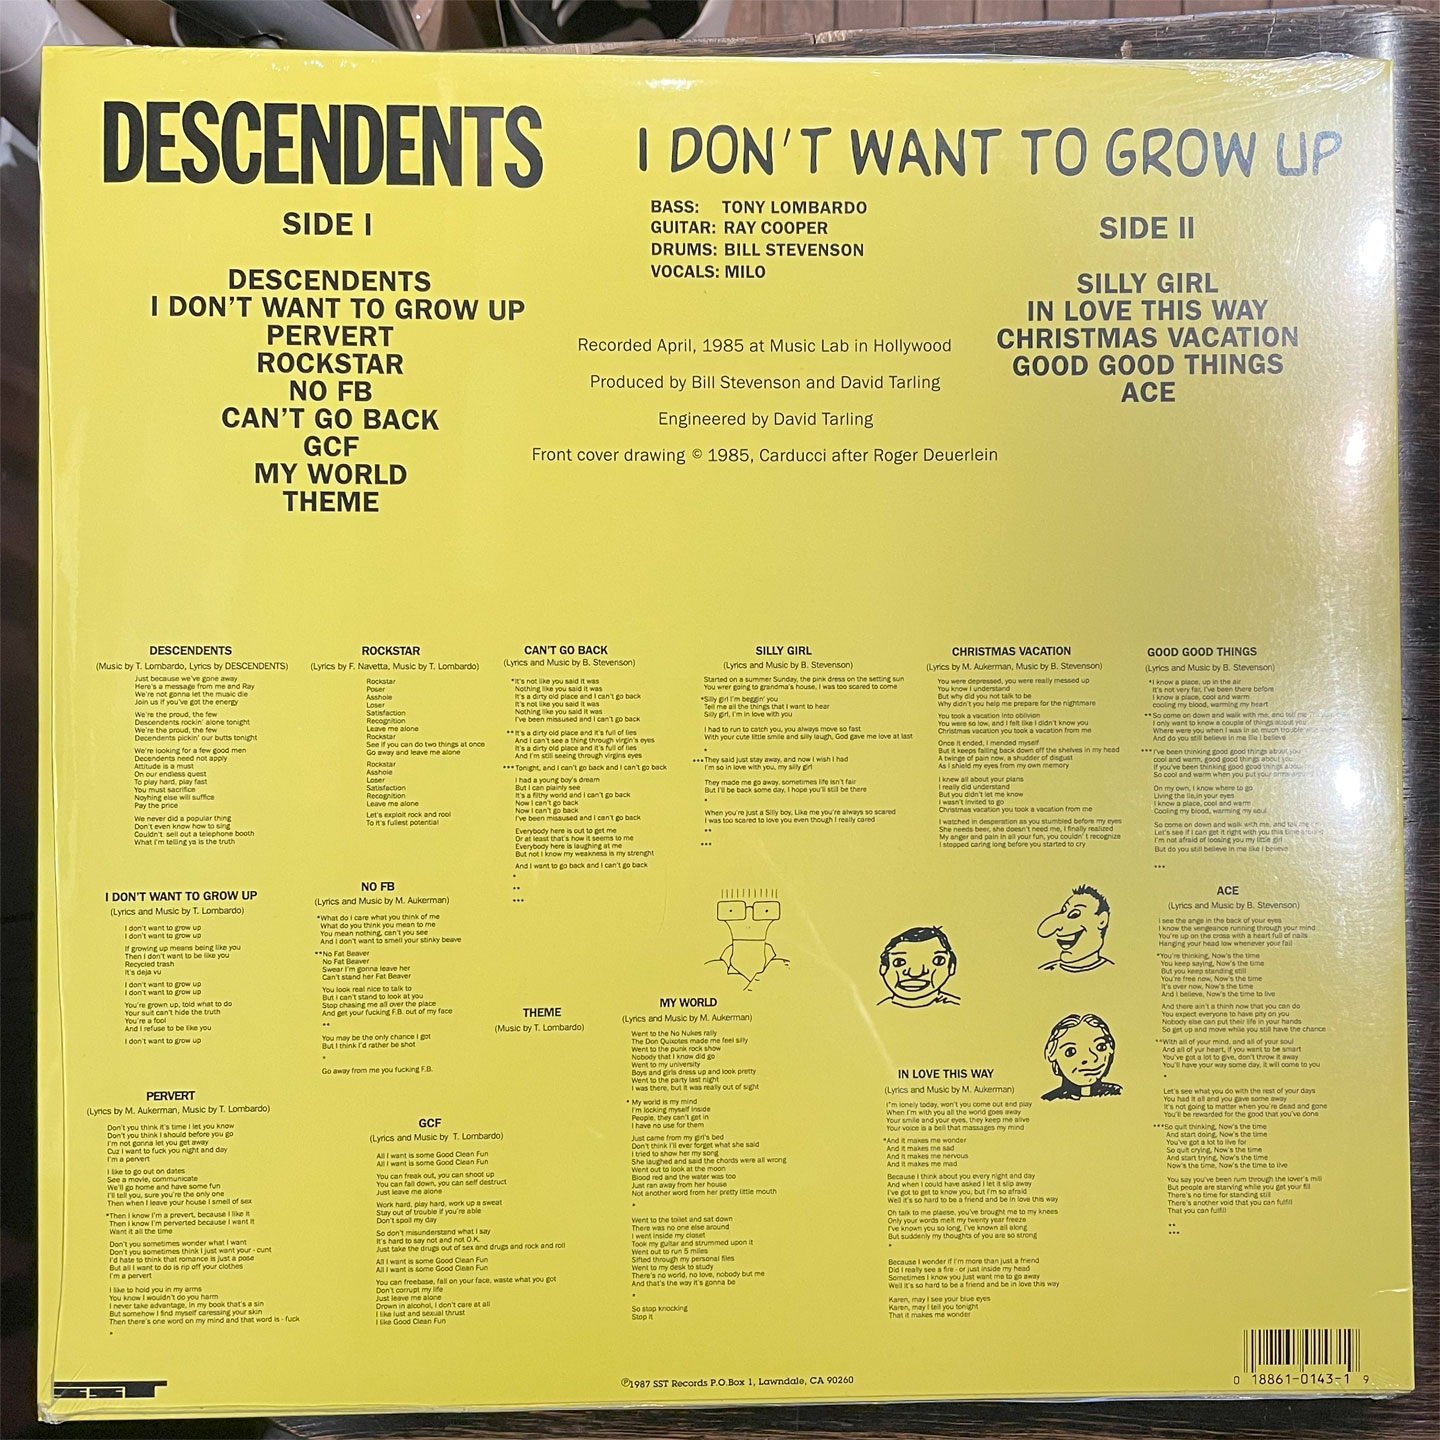 DESCENDENTS 12” LP I DON'T WANT TO GROW UP